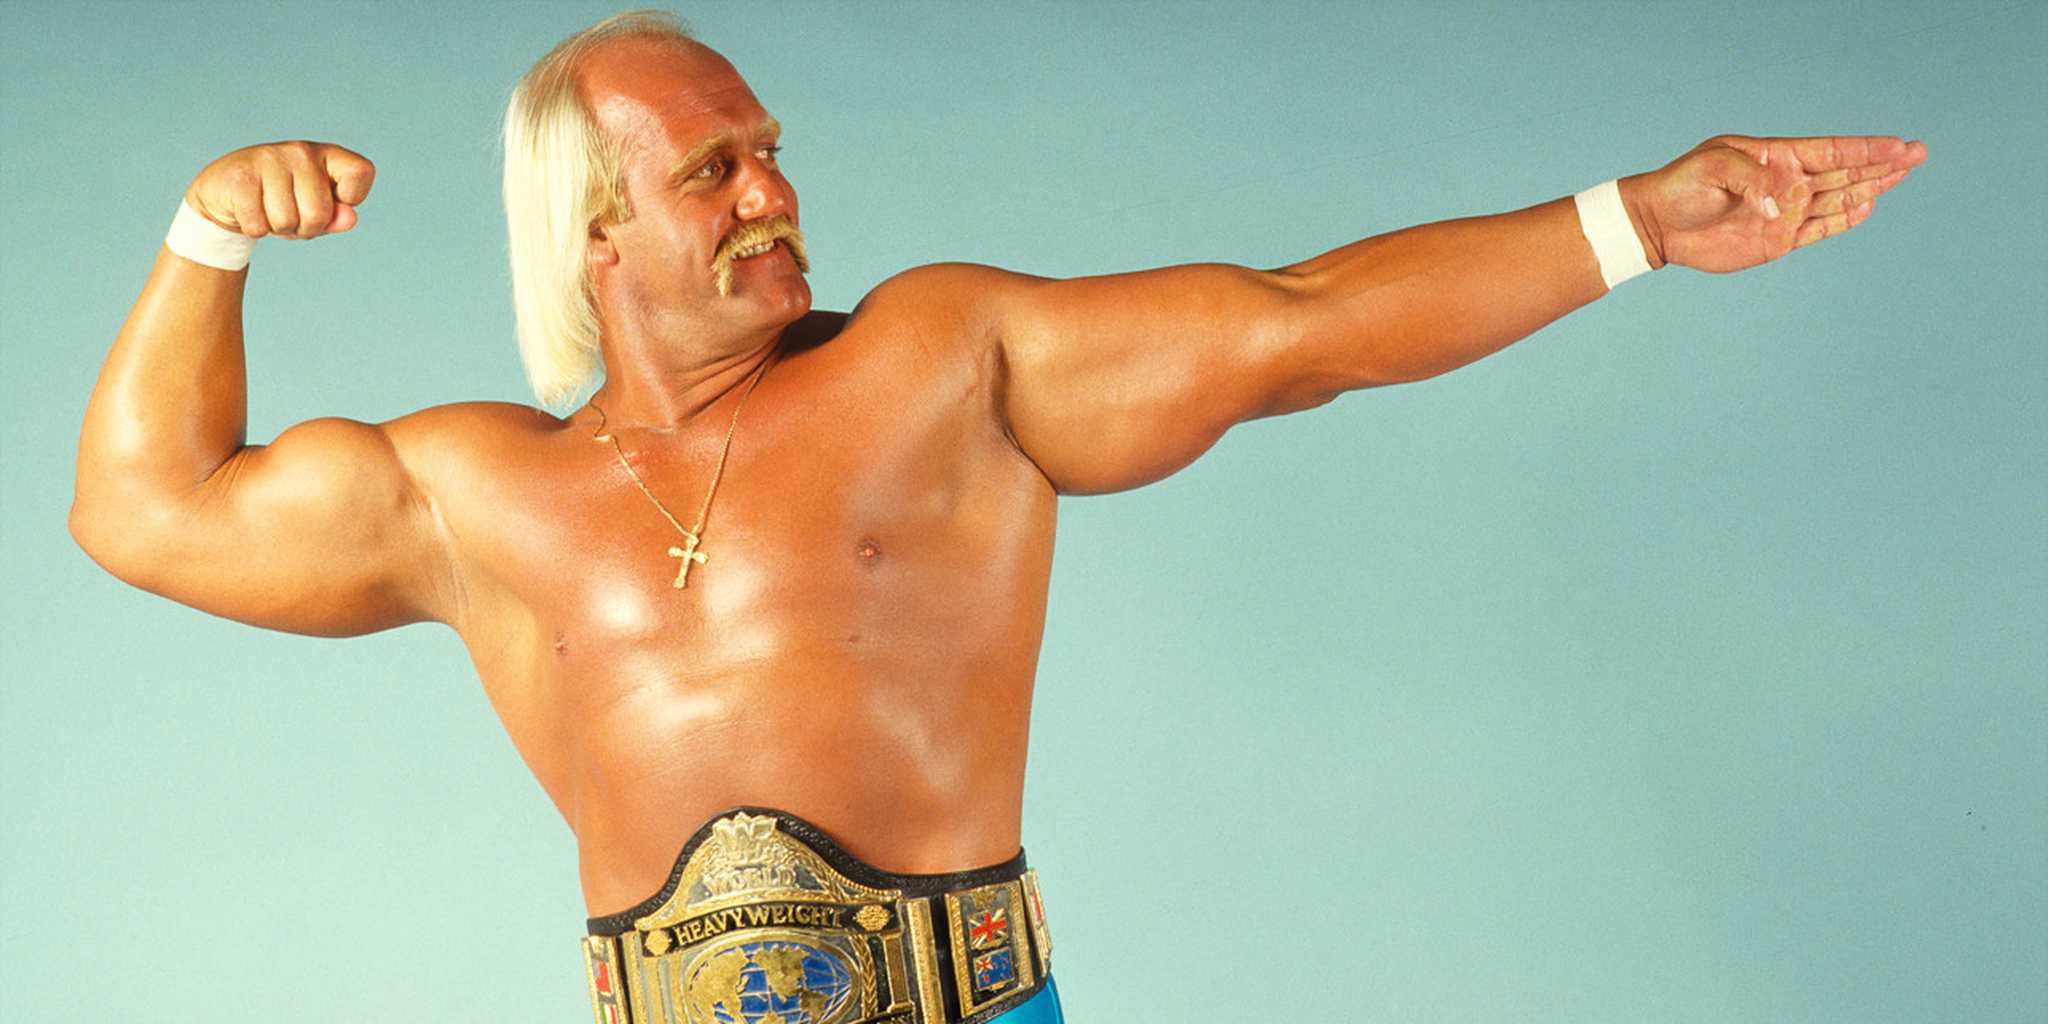 What the Hulk Hogan sex tape trial means for the future of privacy pic